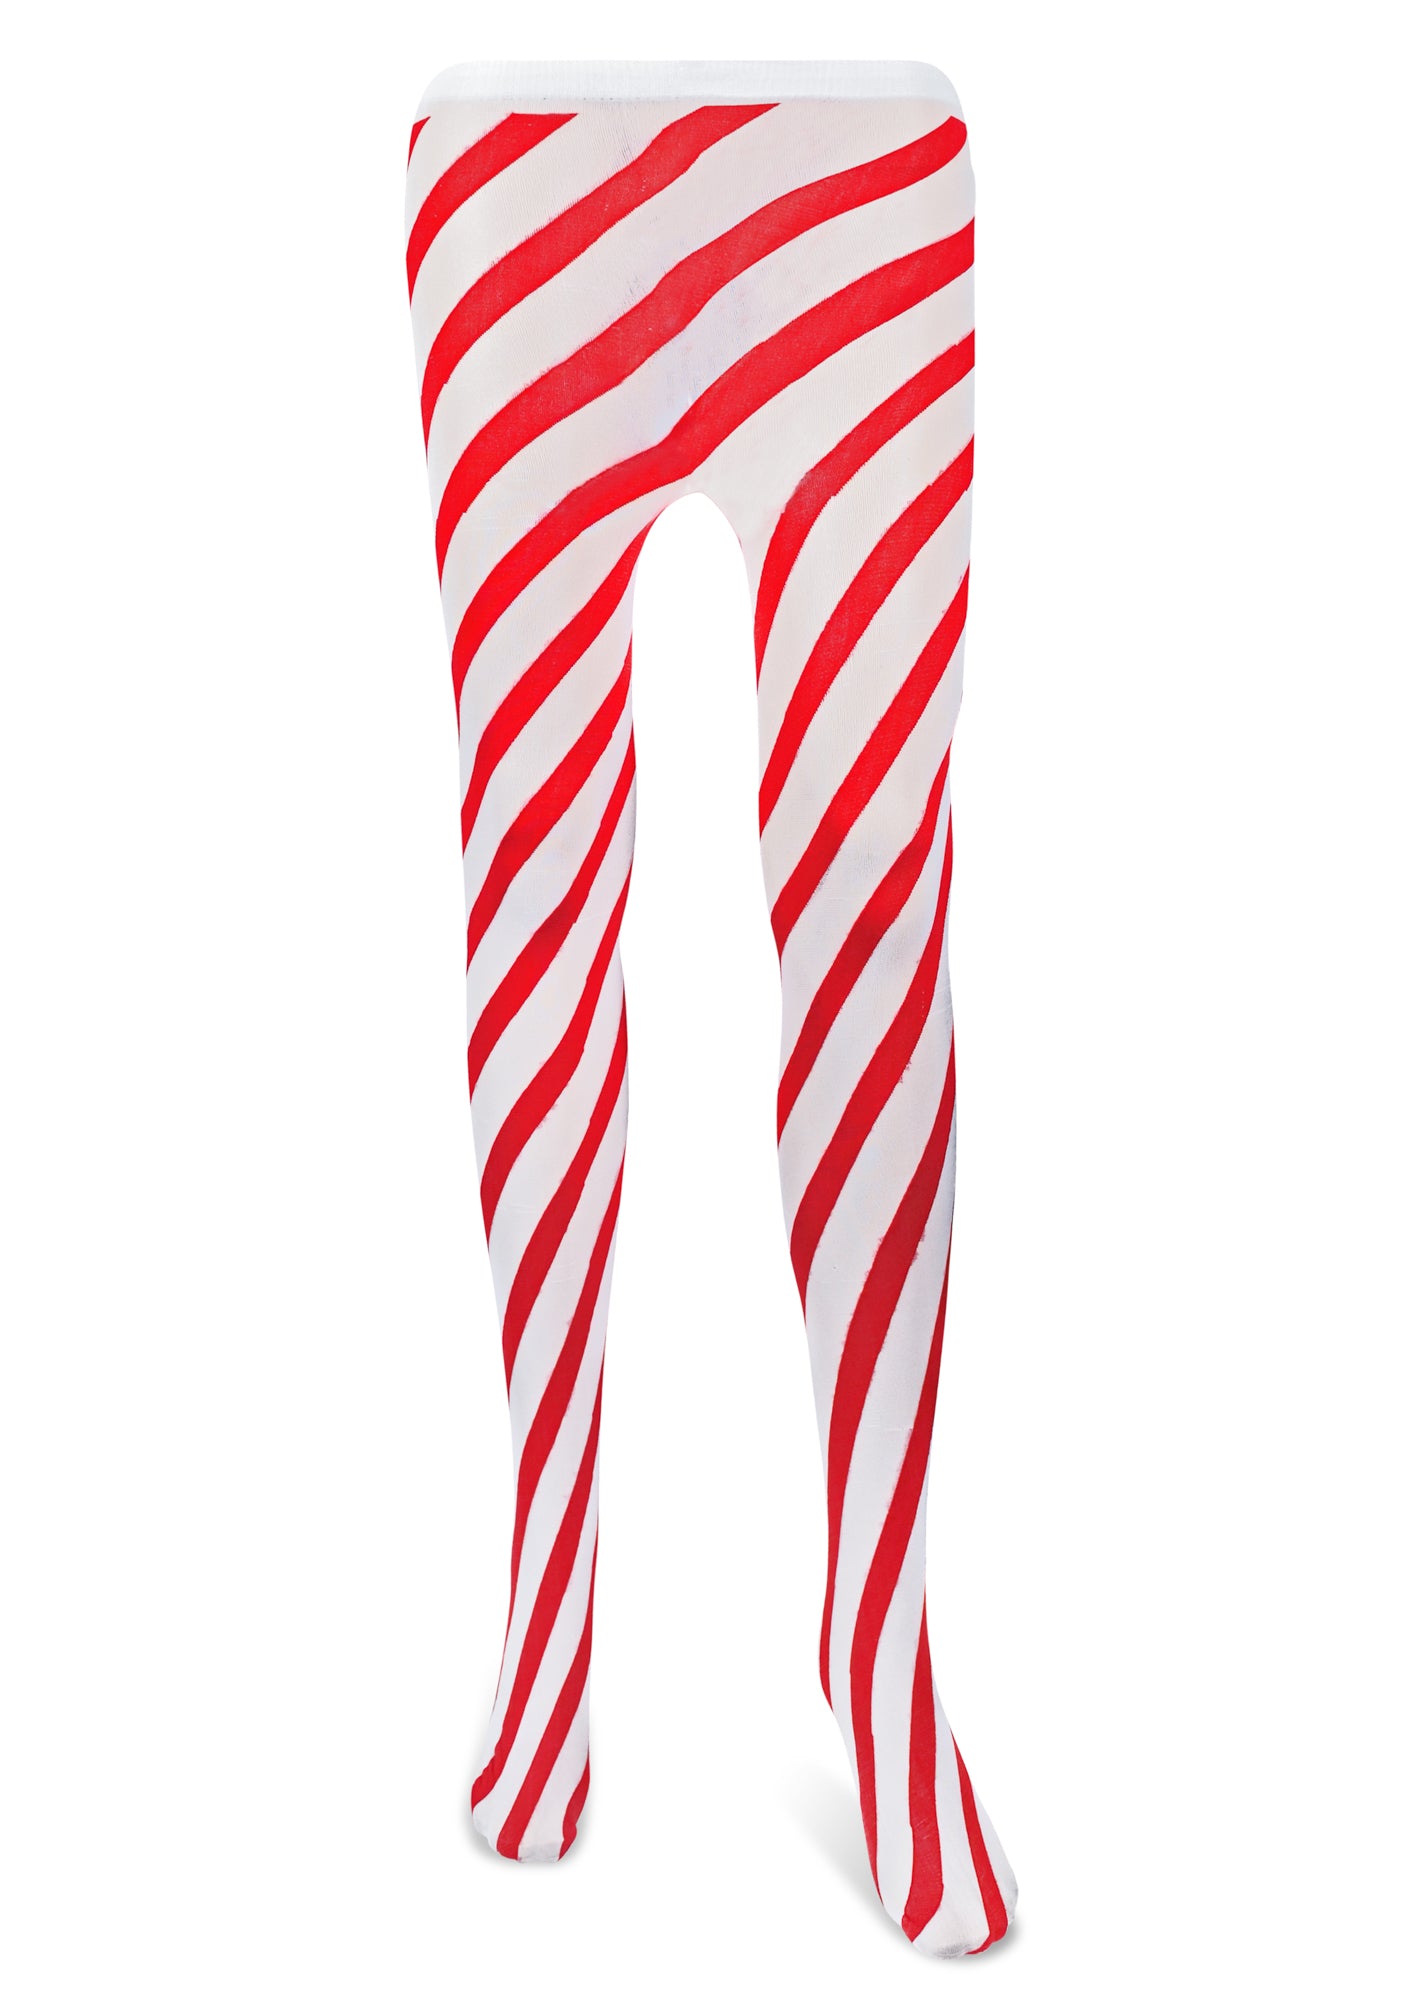 Candy Cane Striped Tights – Red and White Diagonally Striped Nylon